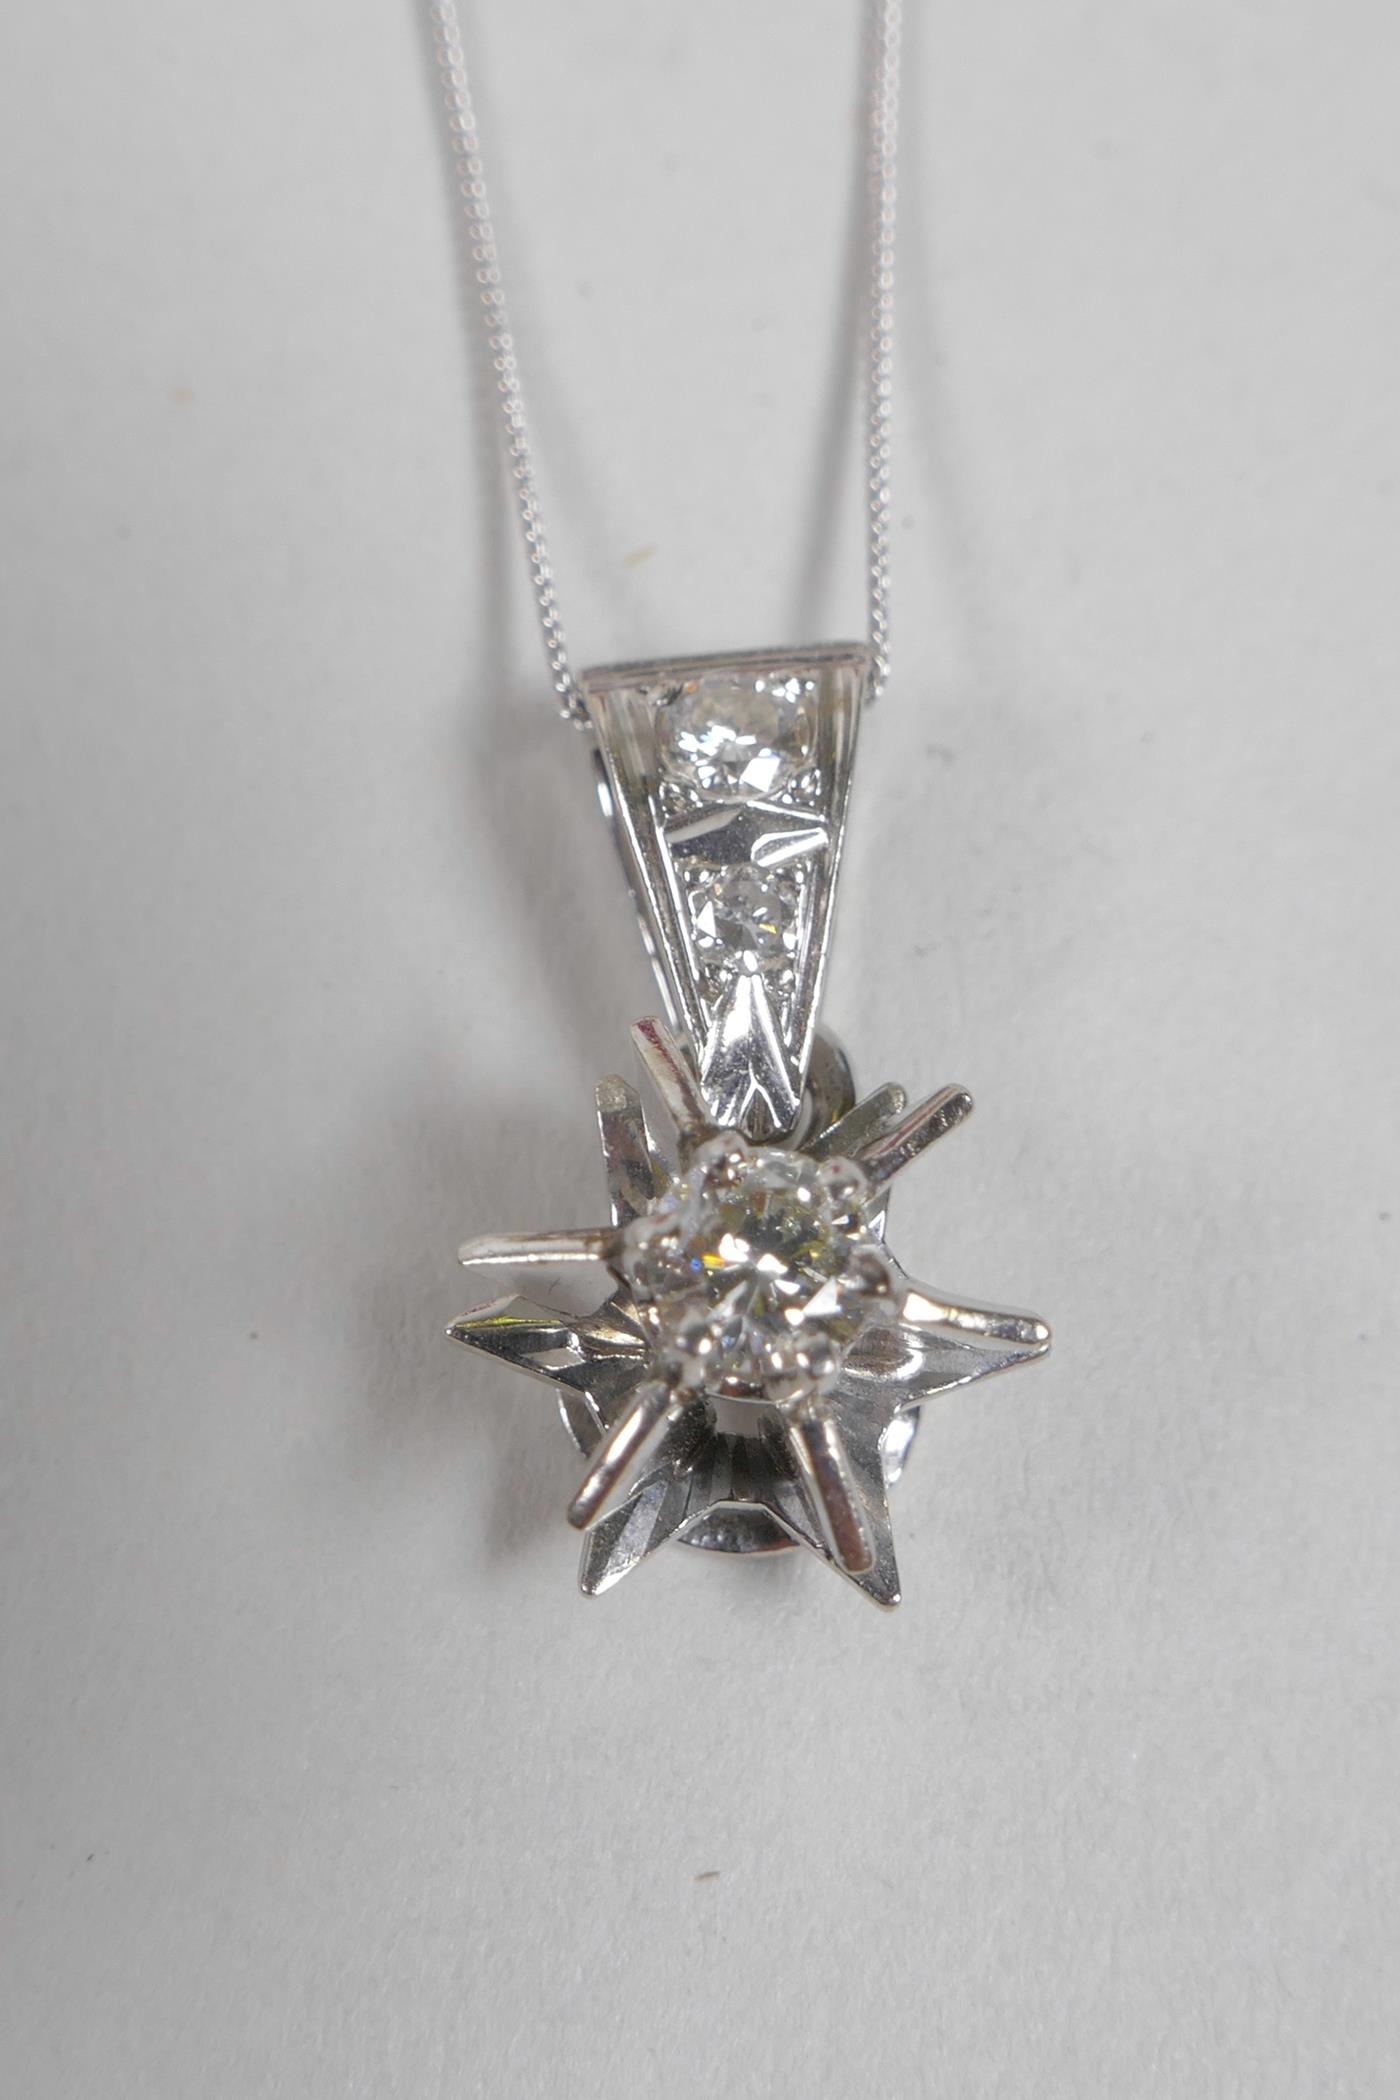 An 18ct white gold, star shaped and diamond set pendant necklace - Image 2 of 3